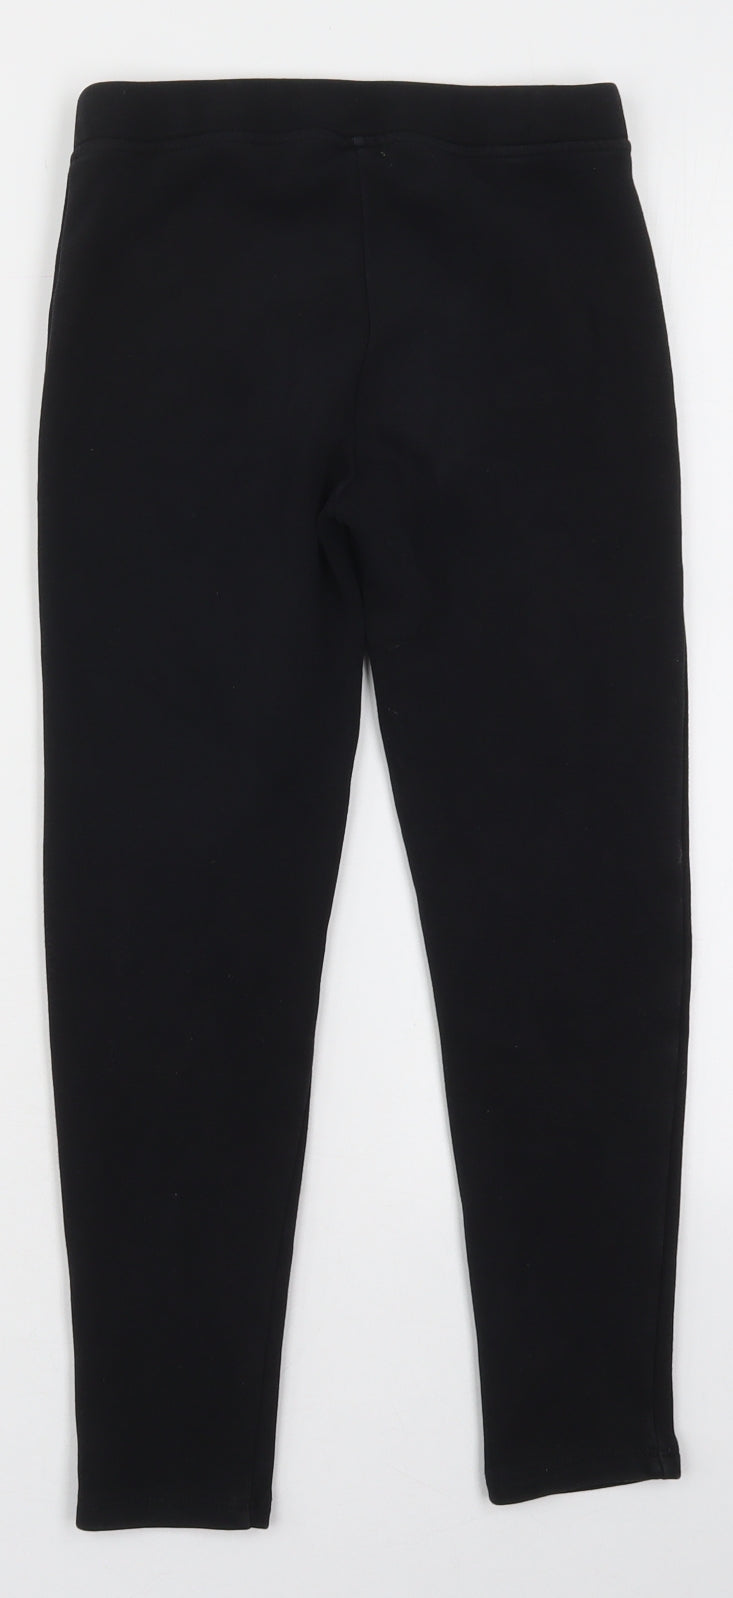 Dunnes Girls Black  Cotton Carrot Trousers Size 9-10 Years  Regular